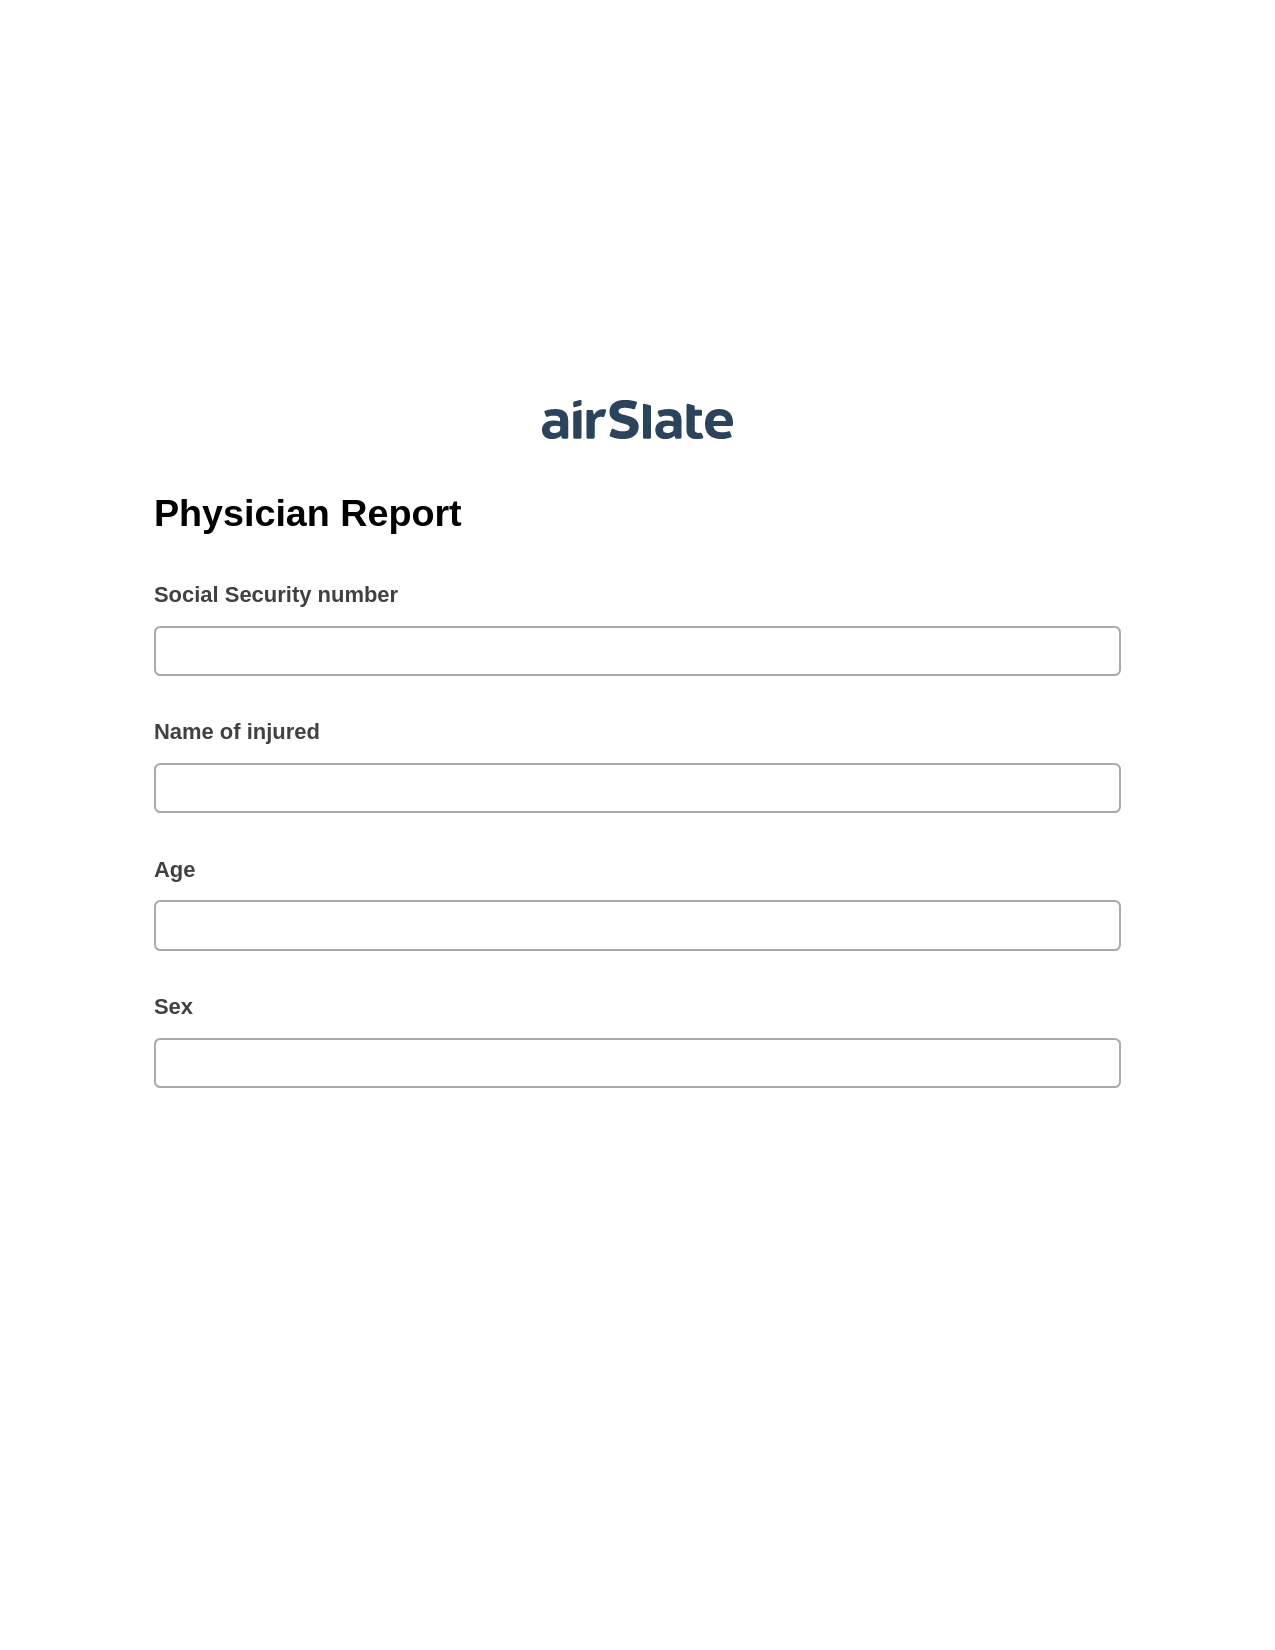 Physician Report Pre-fill Dropdowns from MySQL Bot, Update NetSuite Record Bot, Export to Google Sheet Bot